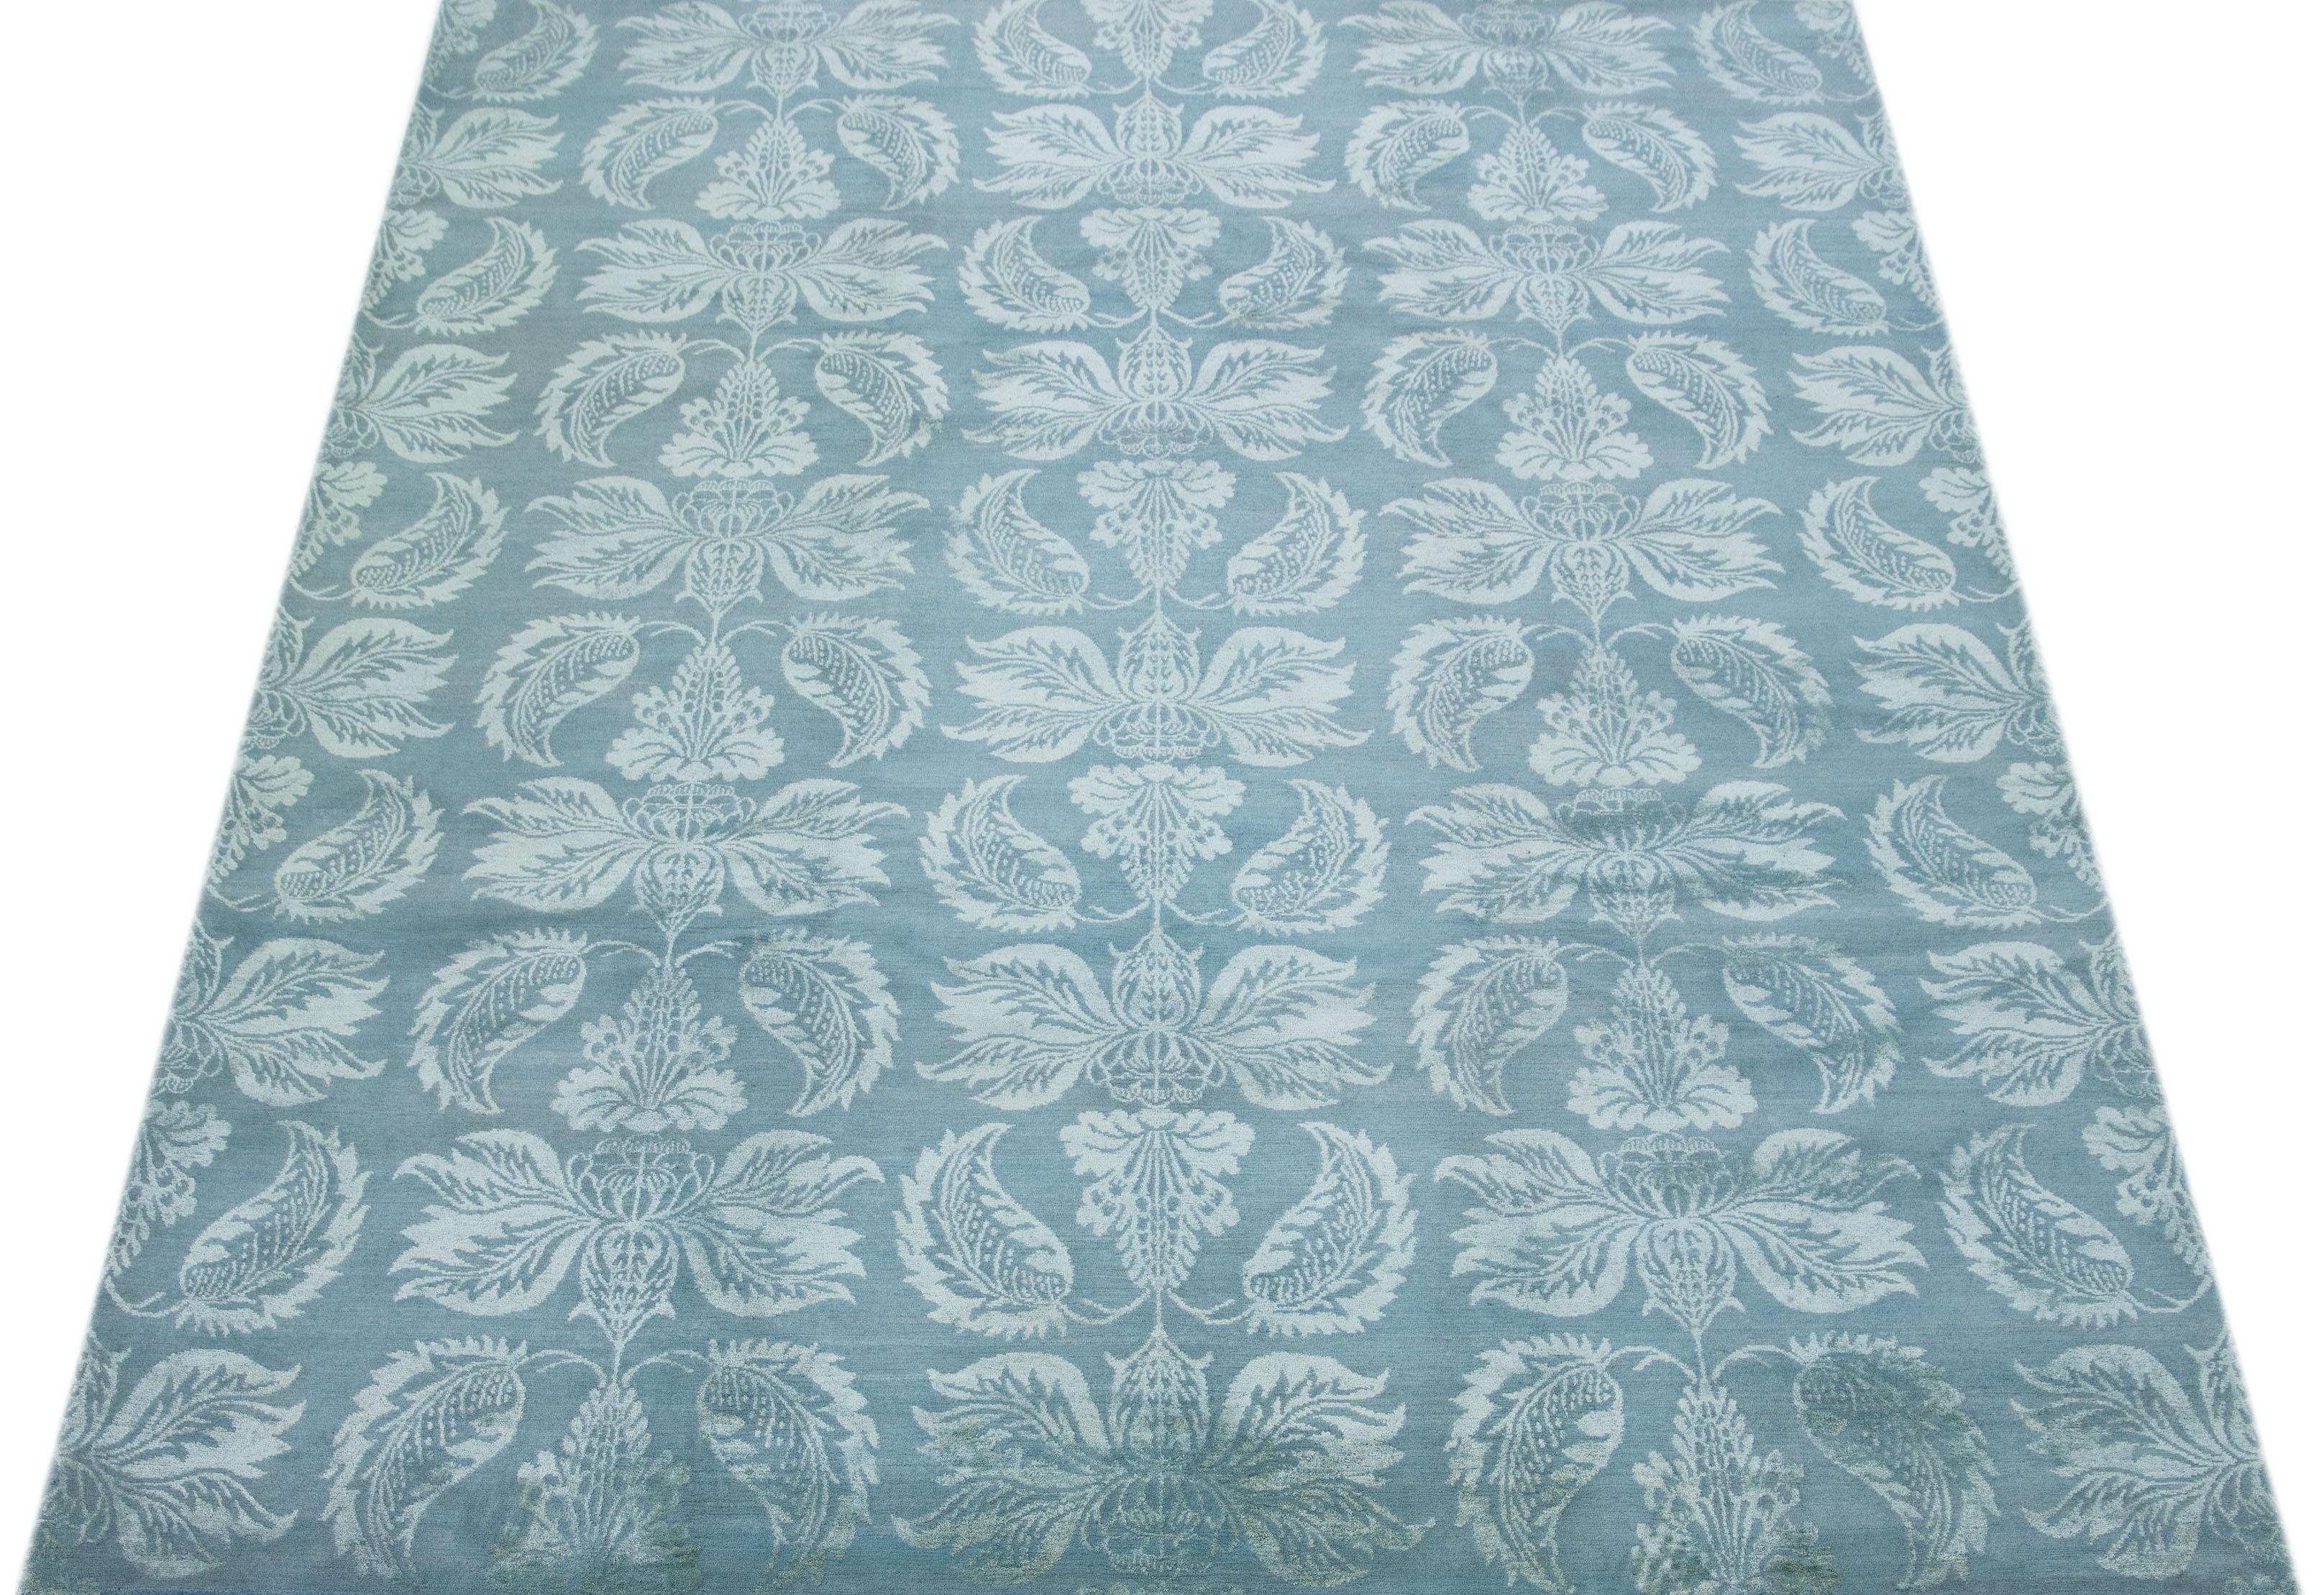 This contemporary Nepalese rug embraces a light blue floral motif that spans its all-over design. Its intricate details and striking color palette create a gorgeous piece. Consider adding this rug to your home decor for a touch of